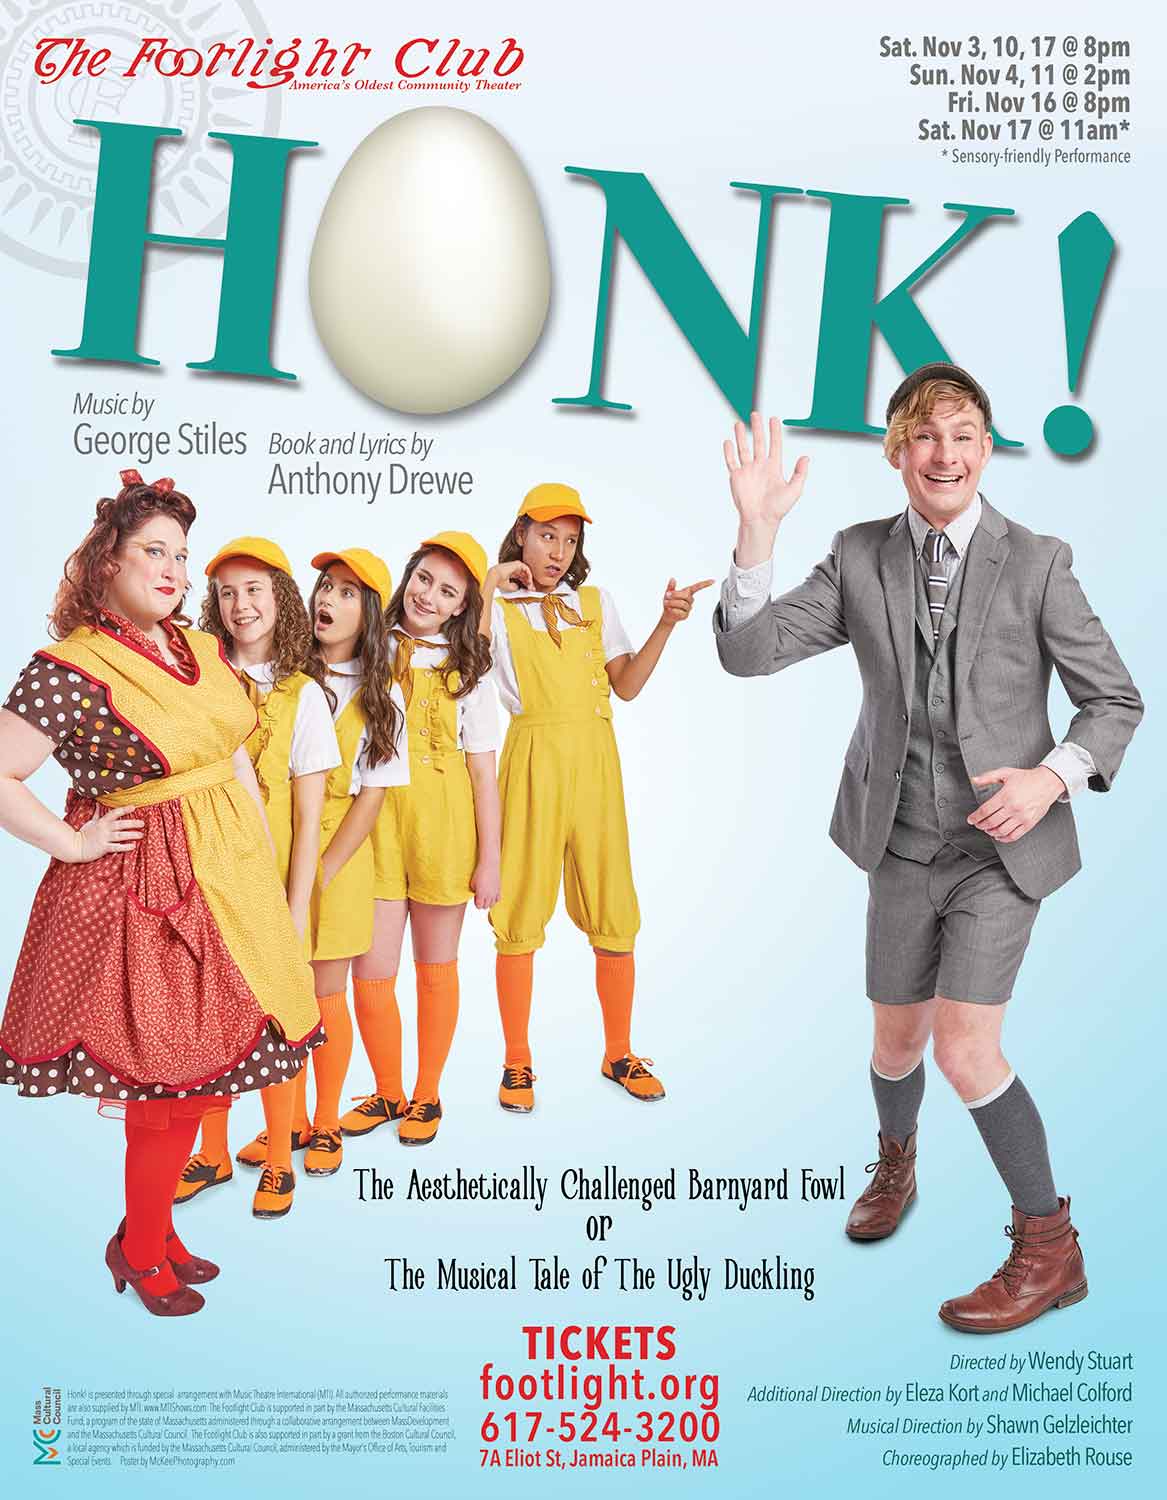 Honk! poster for the Footlight Club.